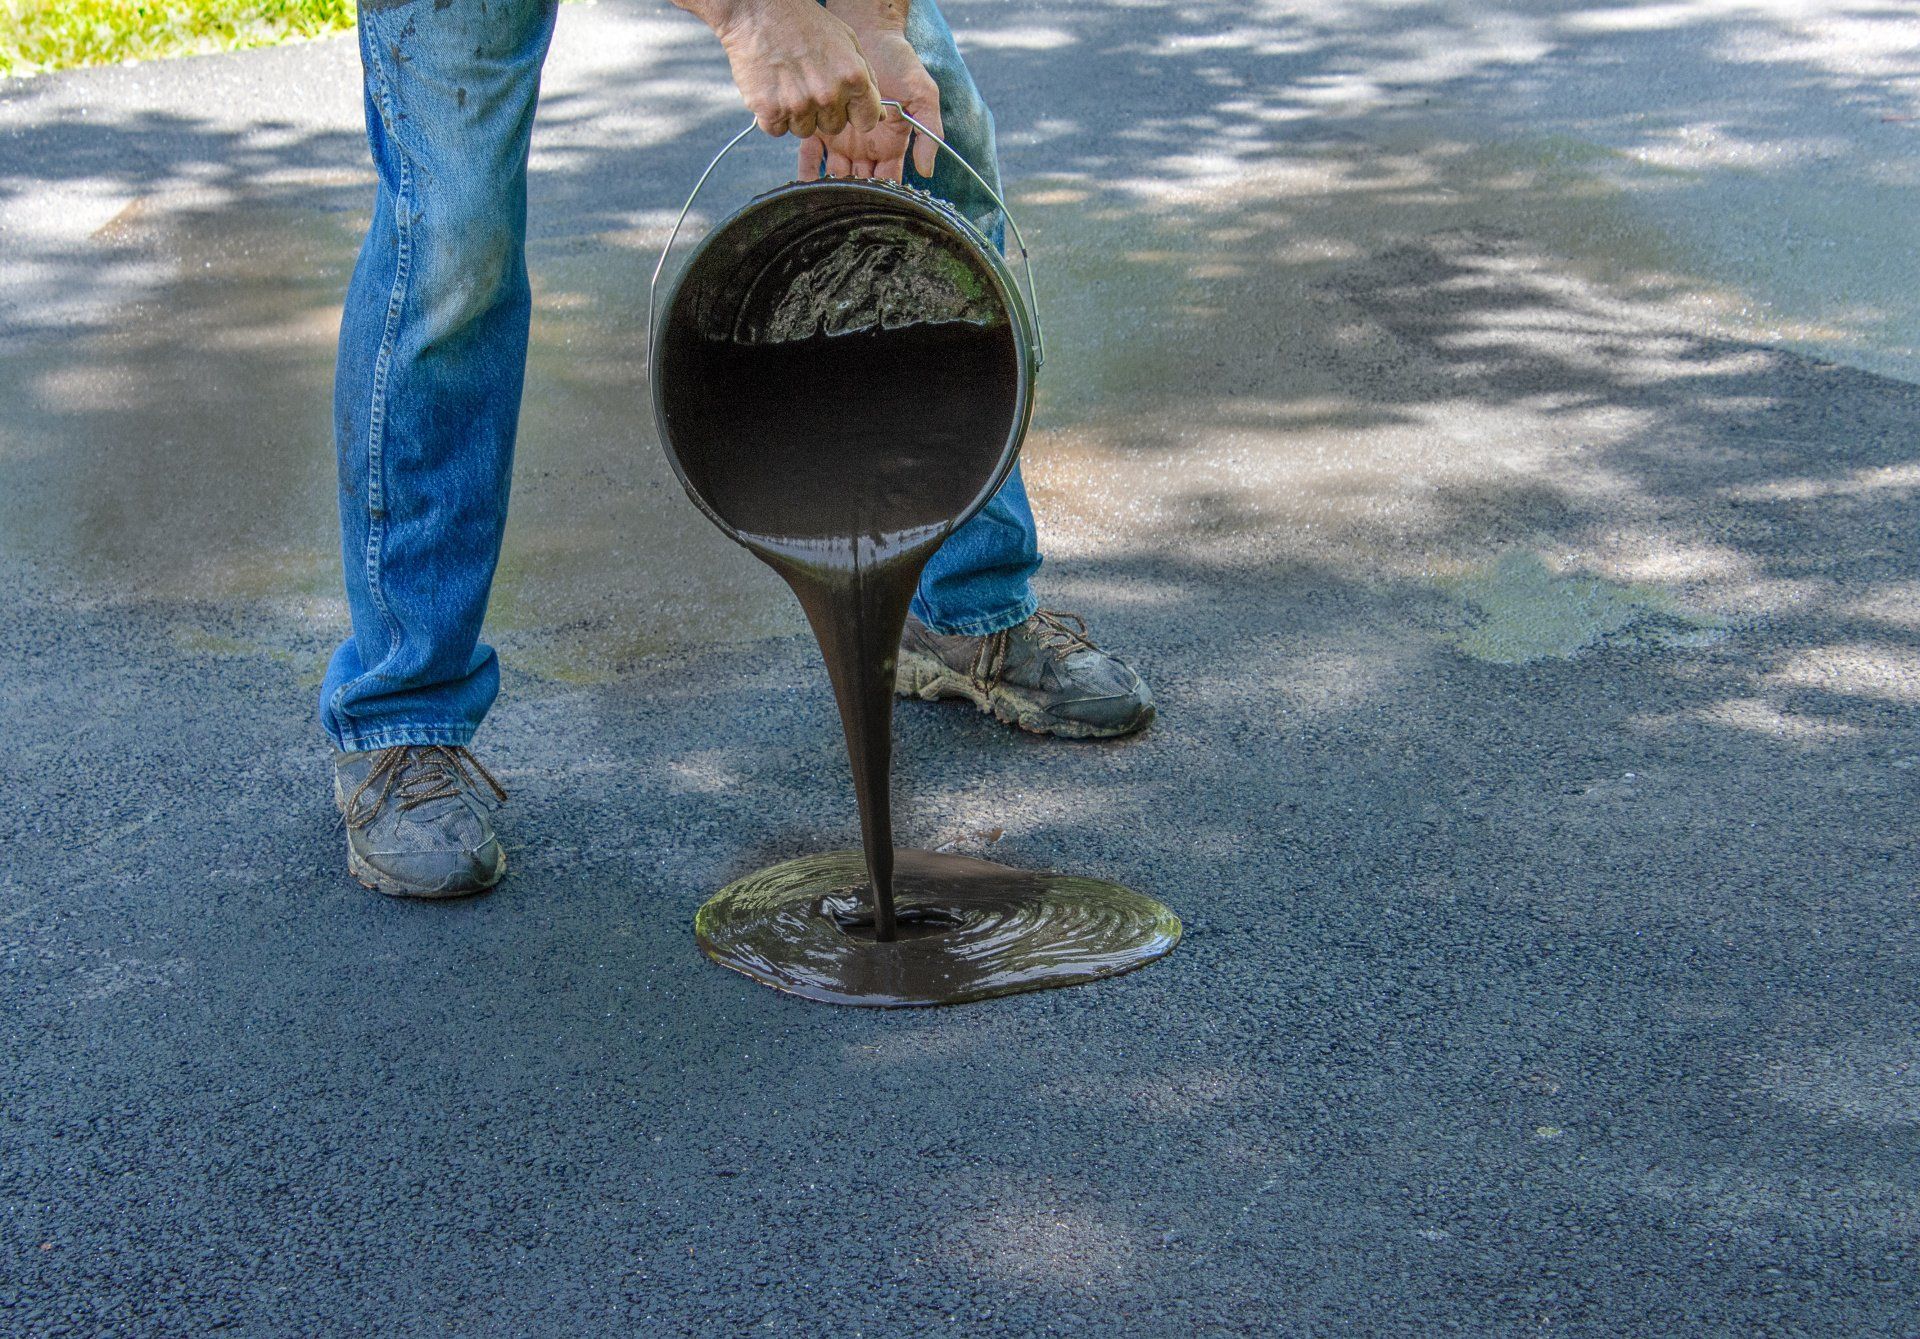 Pouring tar, asphalt sealant onto a driveway for resealing in San Antonio.